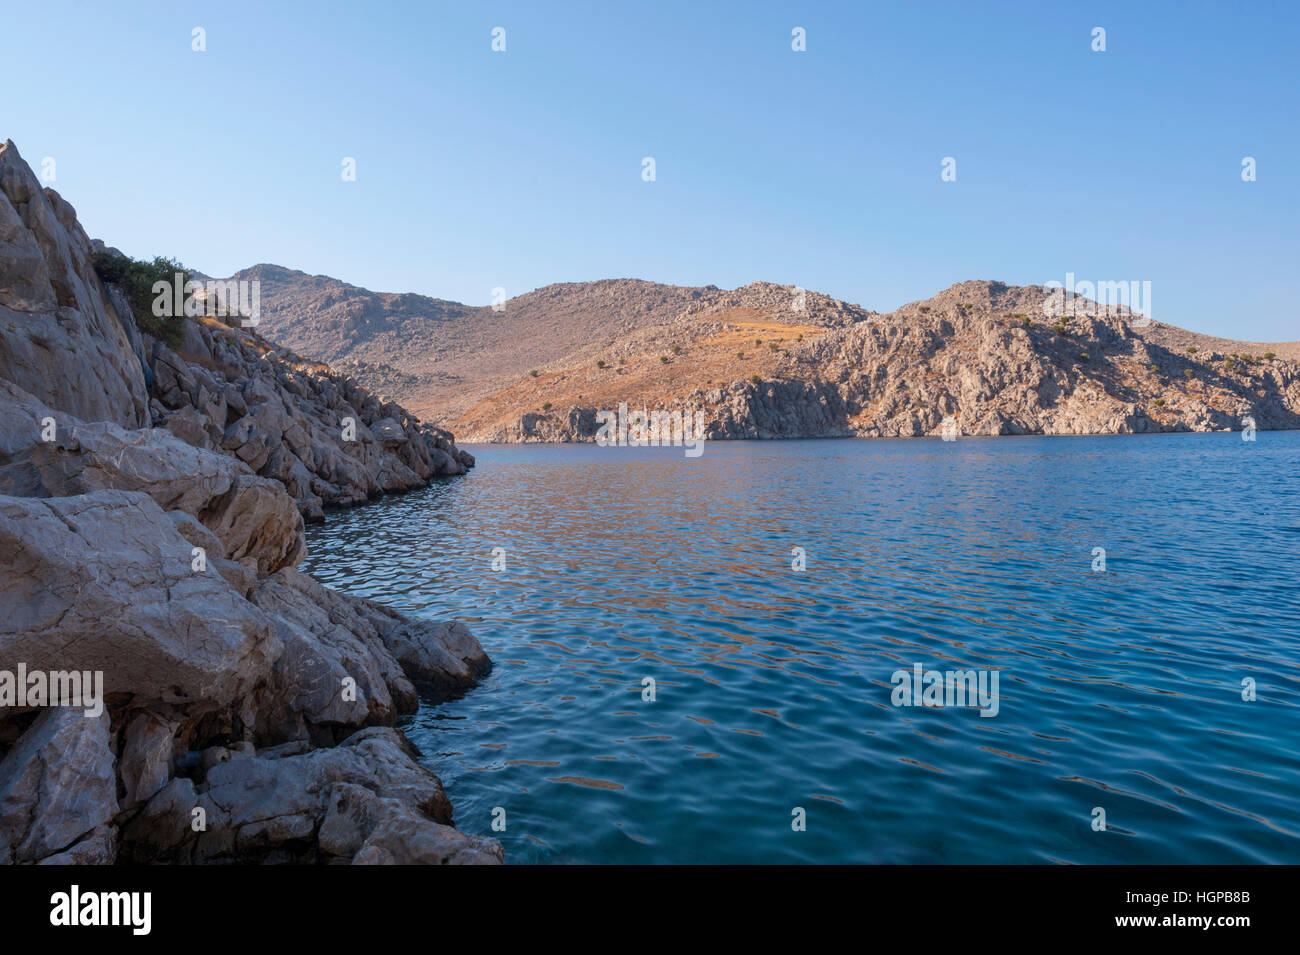 Looking out from Saint Nicholas bay on the Greek island of Symi. Stock Photo